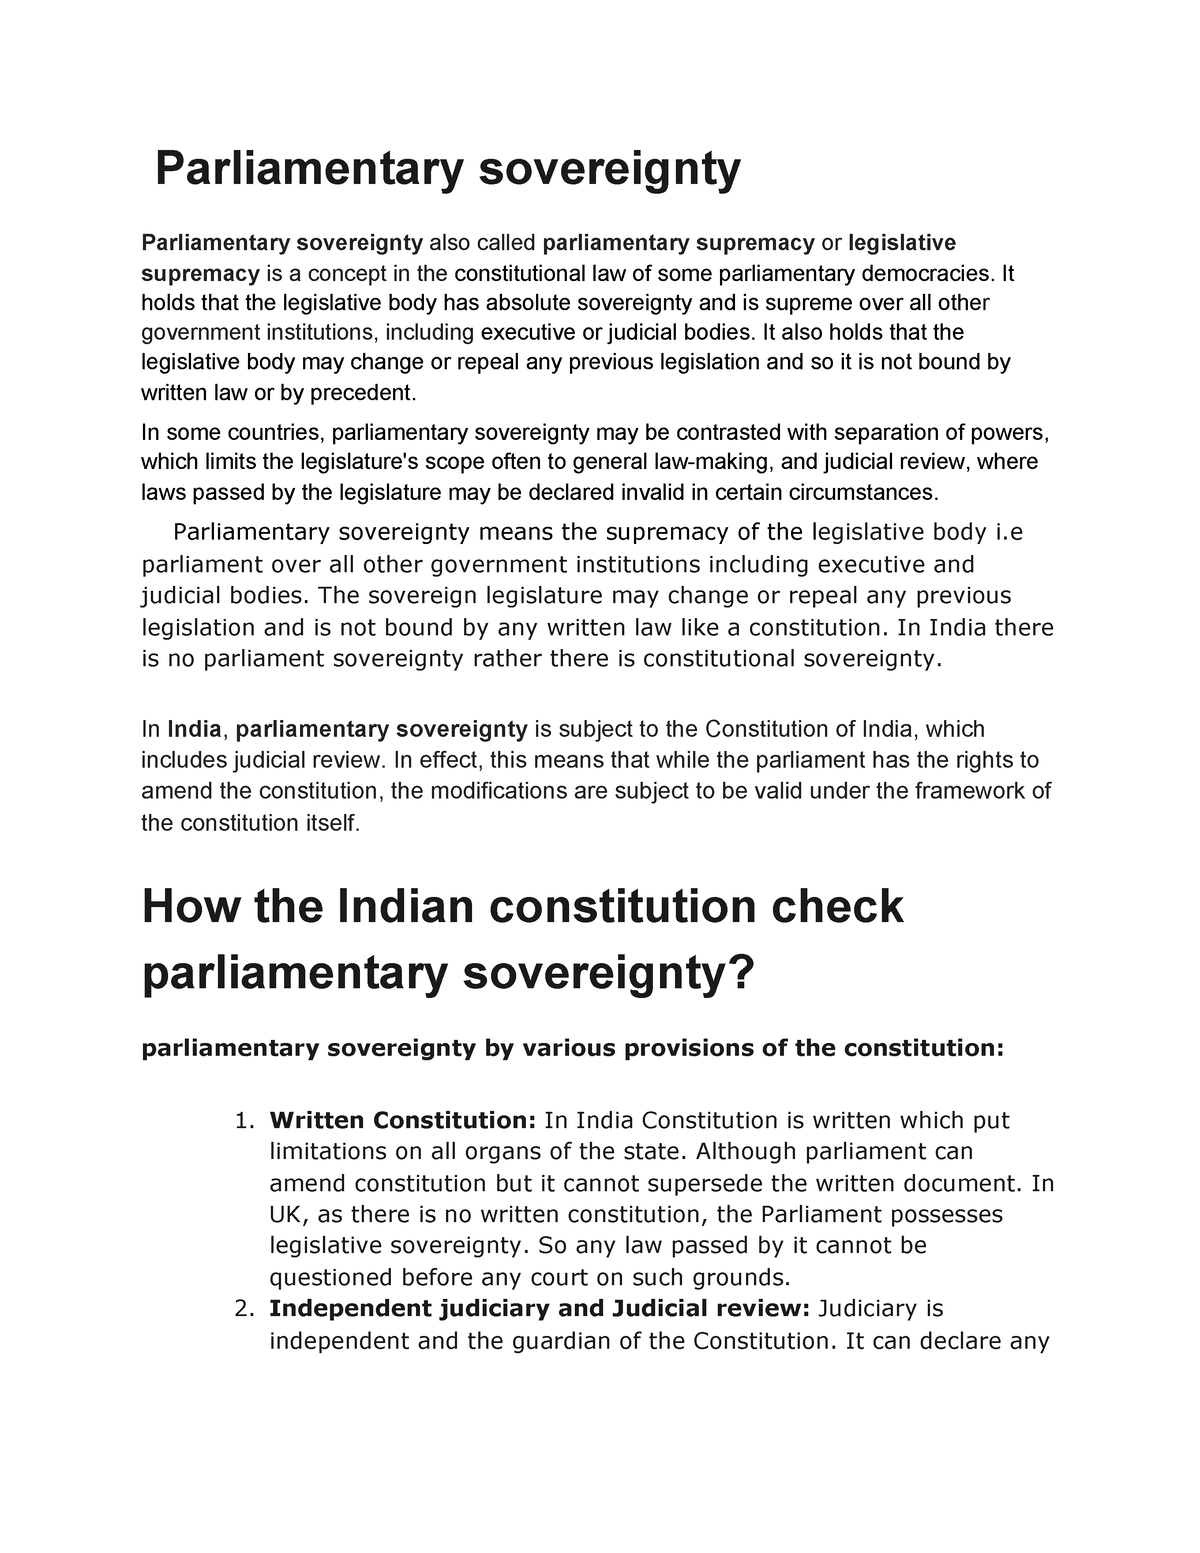 parliamentary sovereignty essay questions